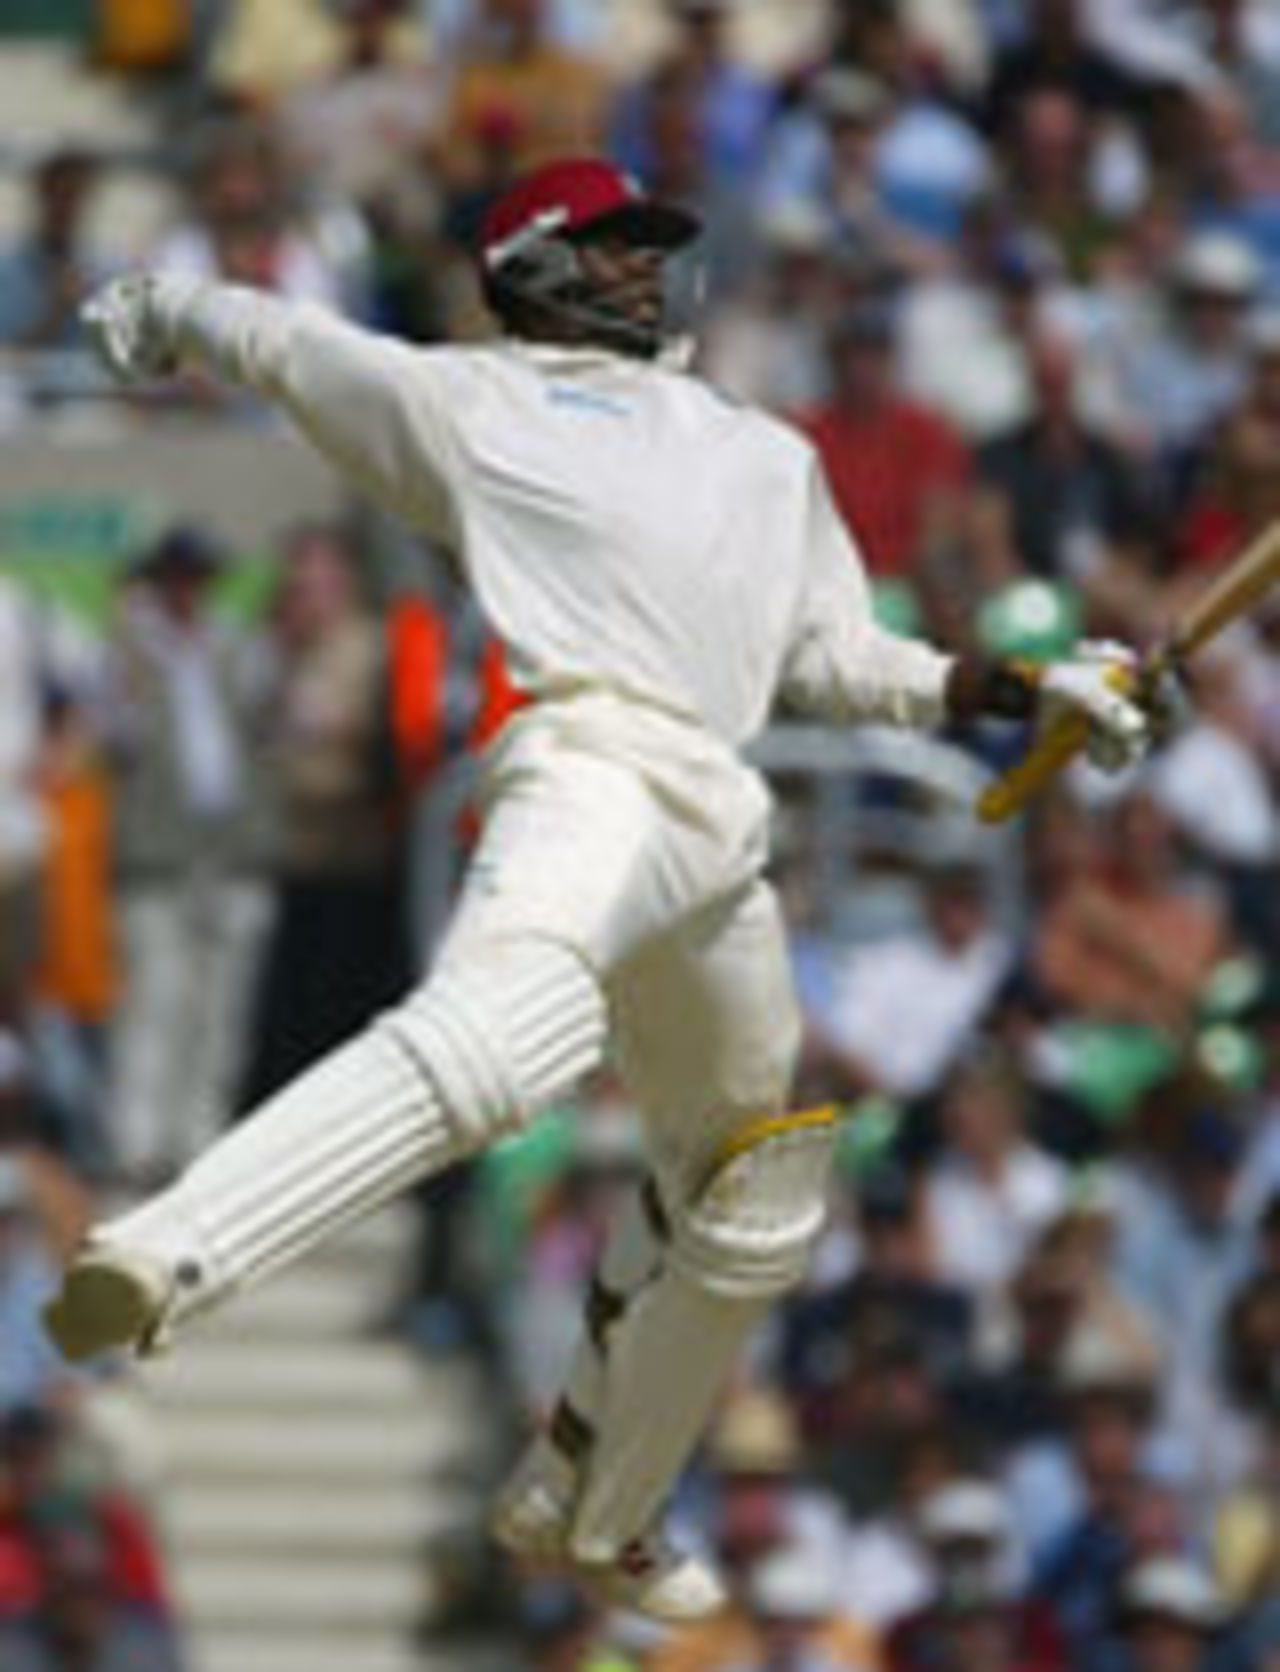 Chris Gayle celebrates reaching his hundred, England v West Indies, 4th Test, The Oval, August 21 2004